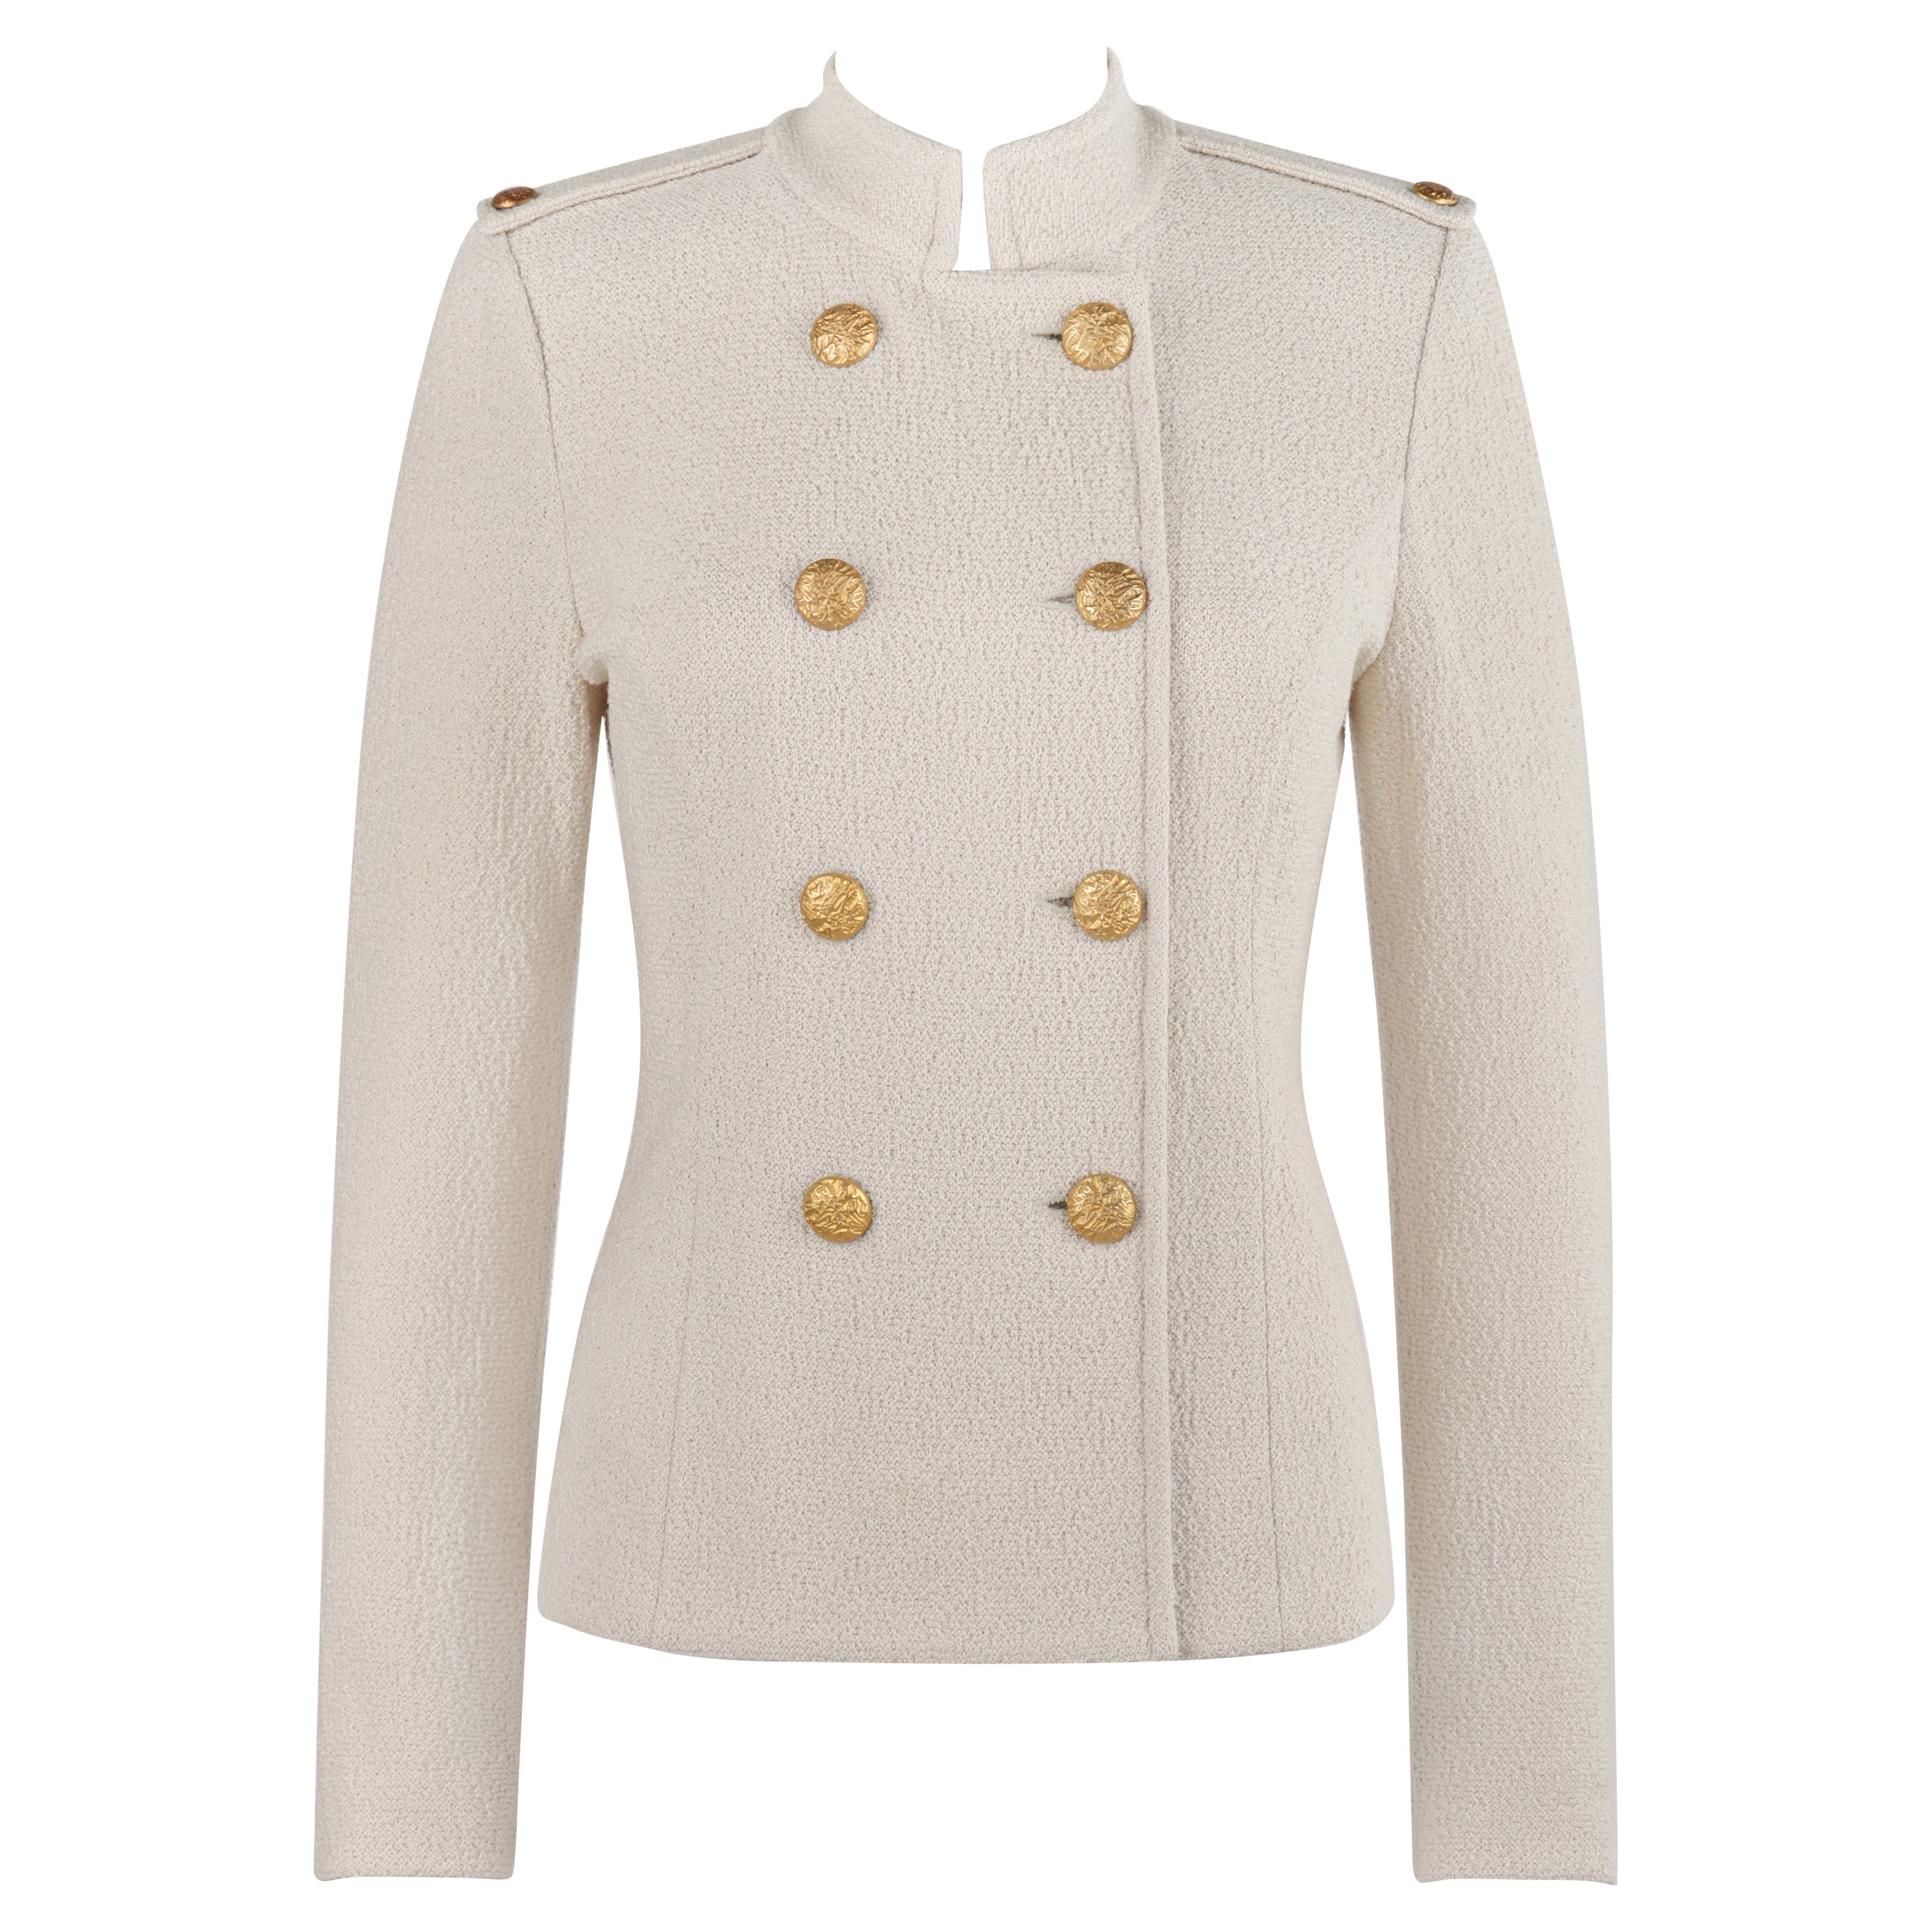 ST JOHN c.2010s Beige Knit Stand Collar Military Double-Breasted Blazer Jacket im Angebot